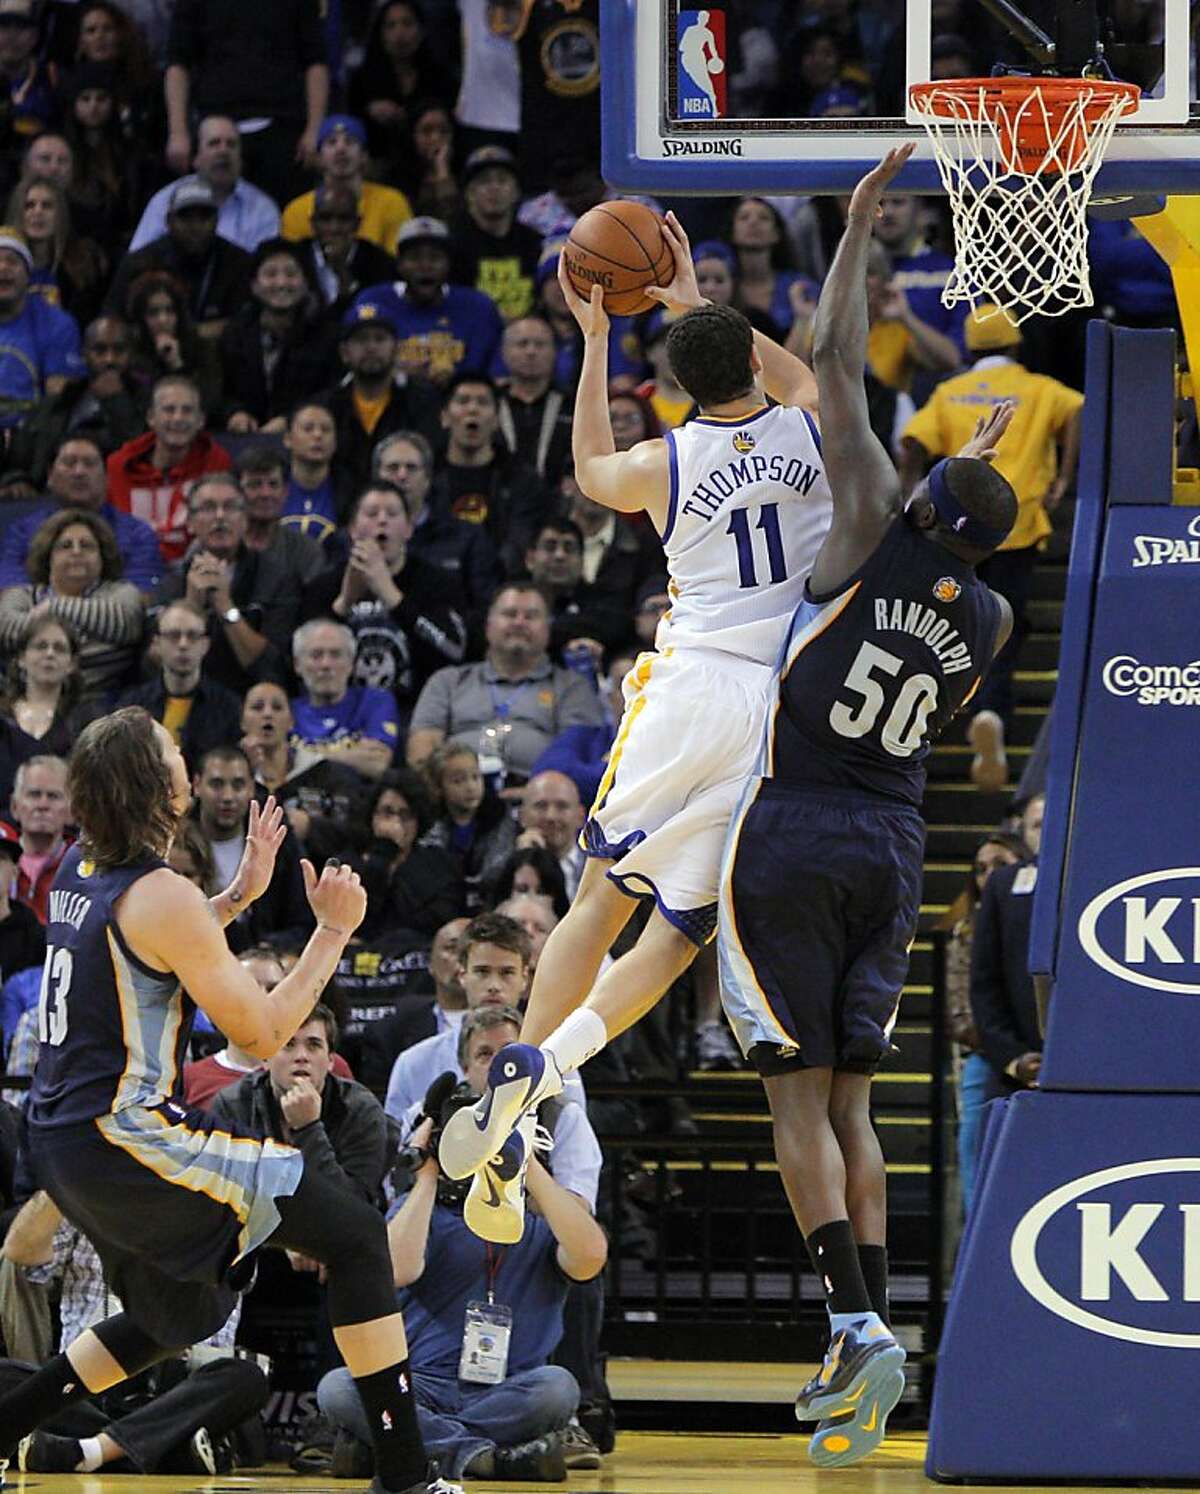 Klay Thompson shoots over Zach Randolph (50) in the second half. The Golden State Warriors played the Memphis Grizzlies at Oracle Arena in Oakland, Calif., on Wednesday, November 20, 2013. The Grizzlies won 88-81 in overtime.